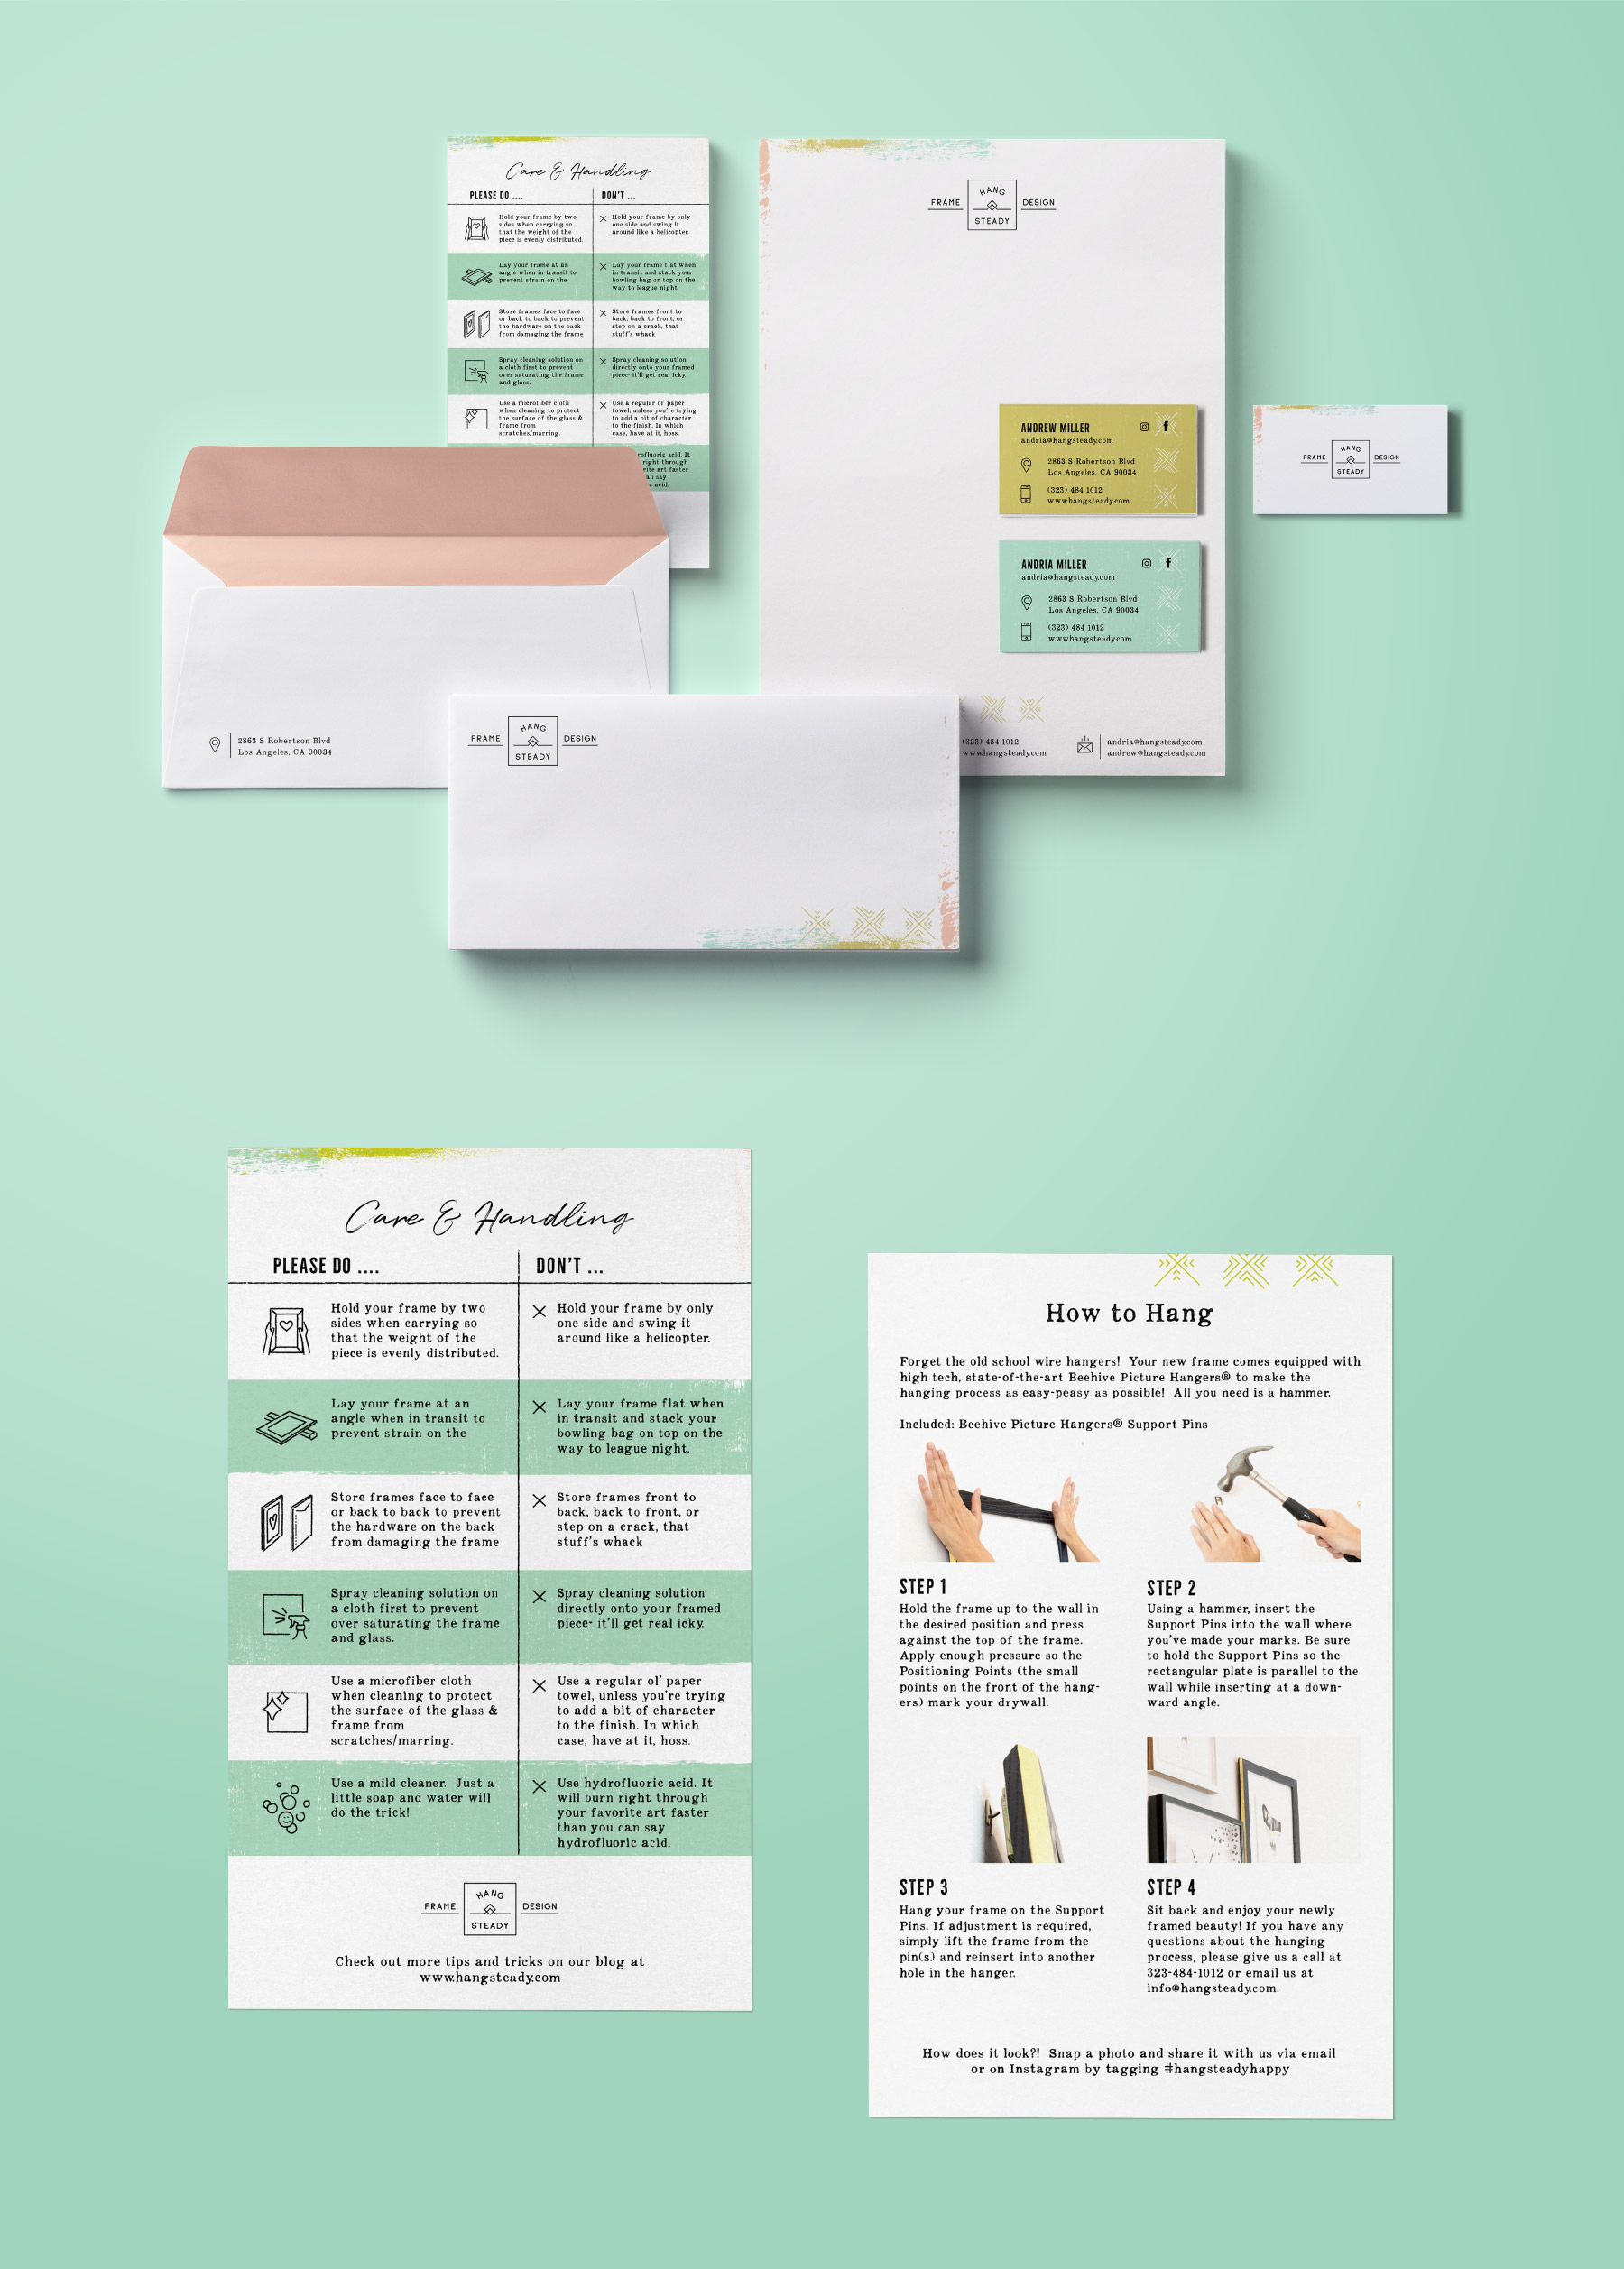 Business stationary and product care instruction card